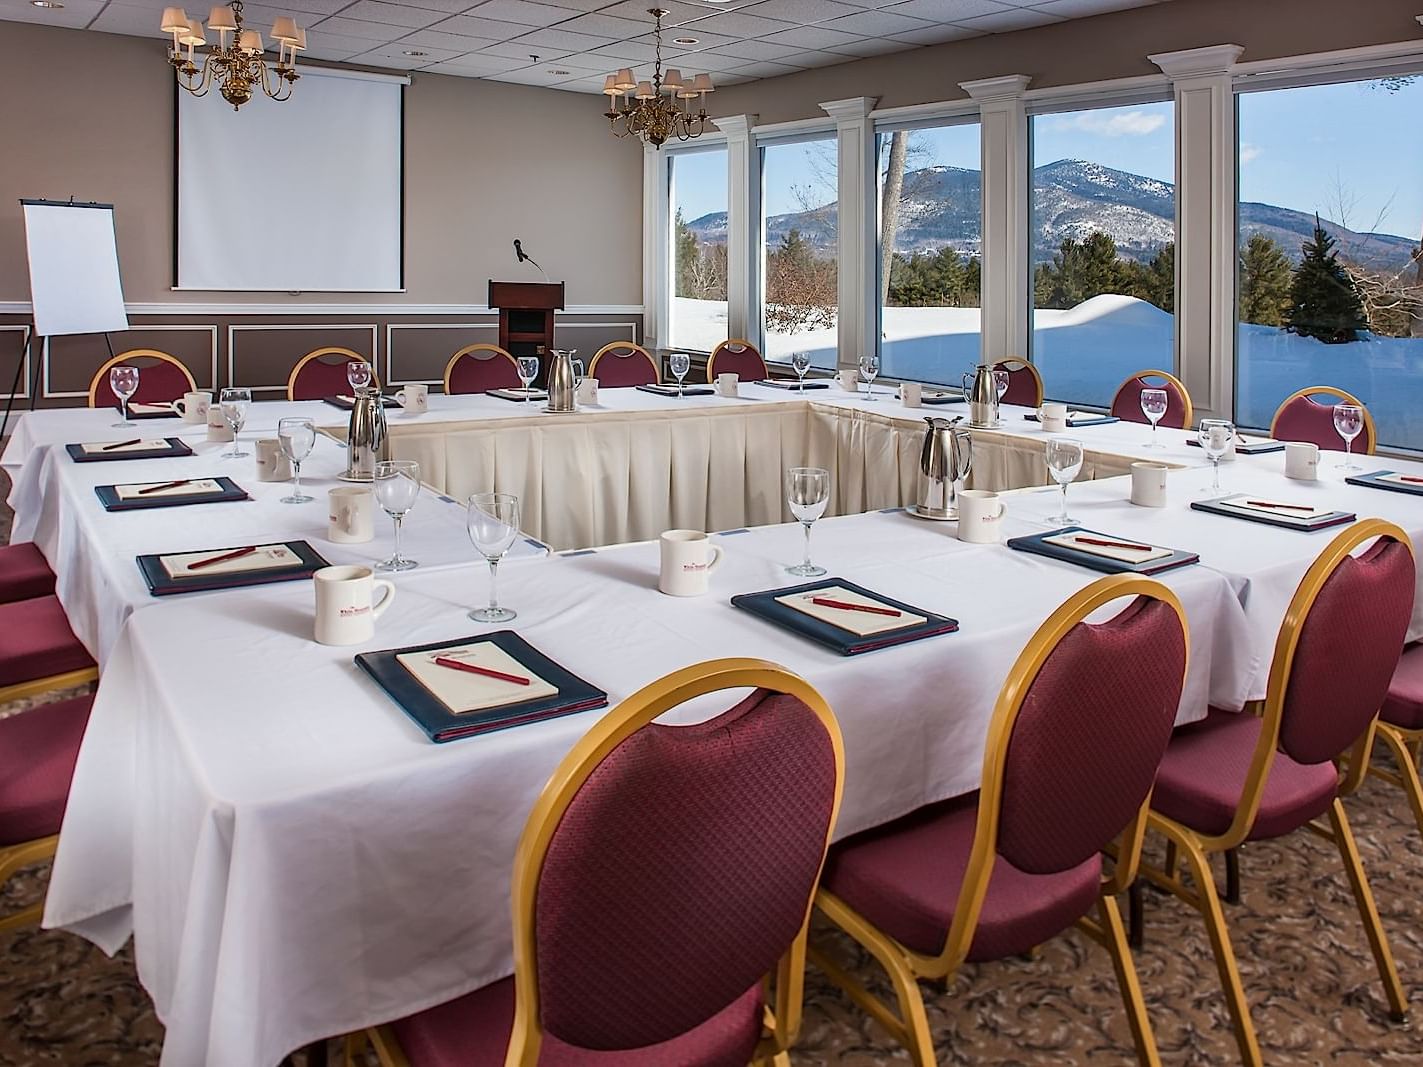 Hallow table arranged for meeting at White Mountain Hotel